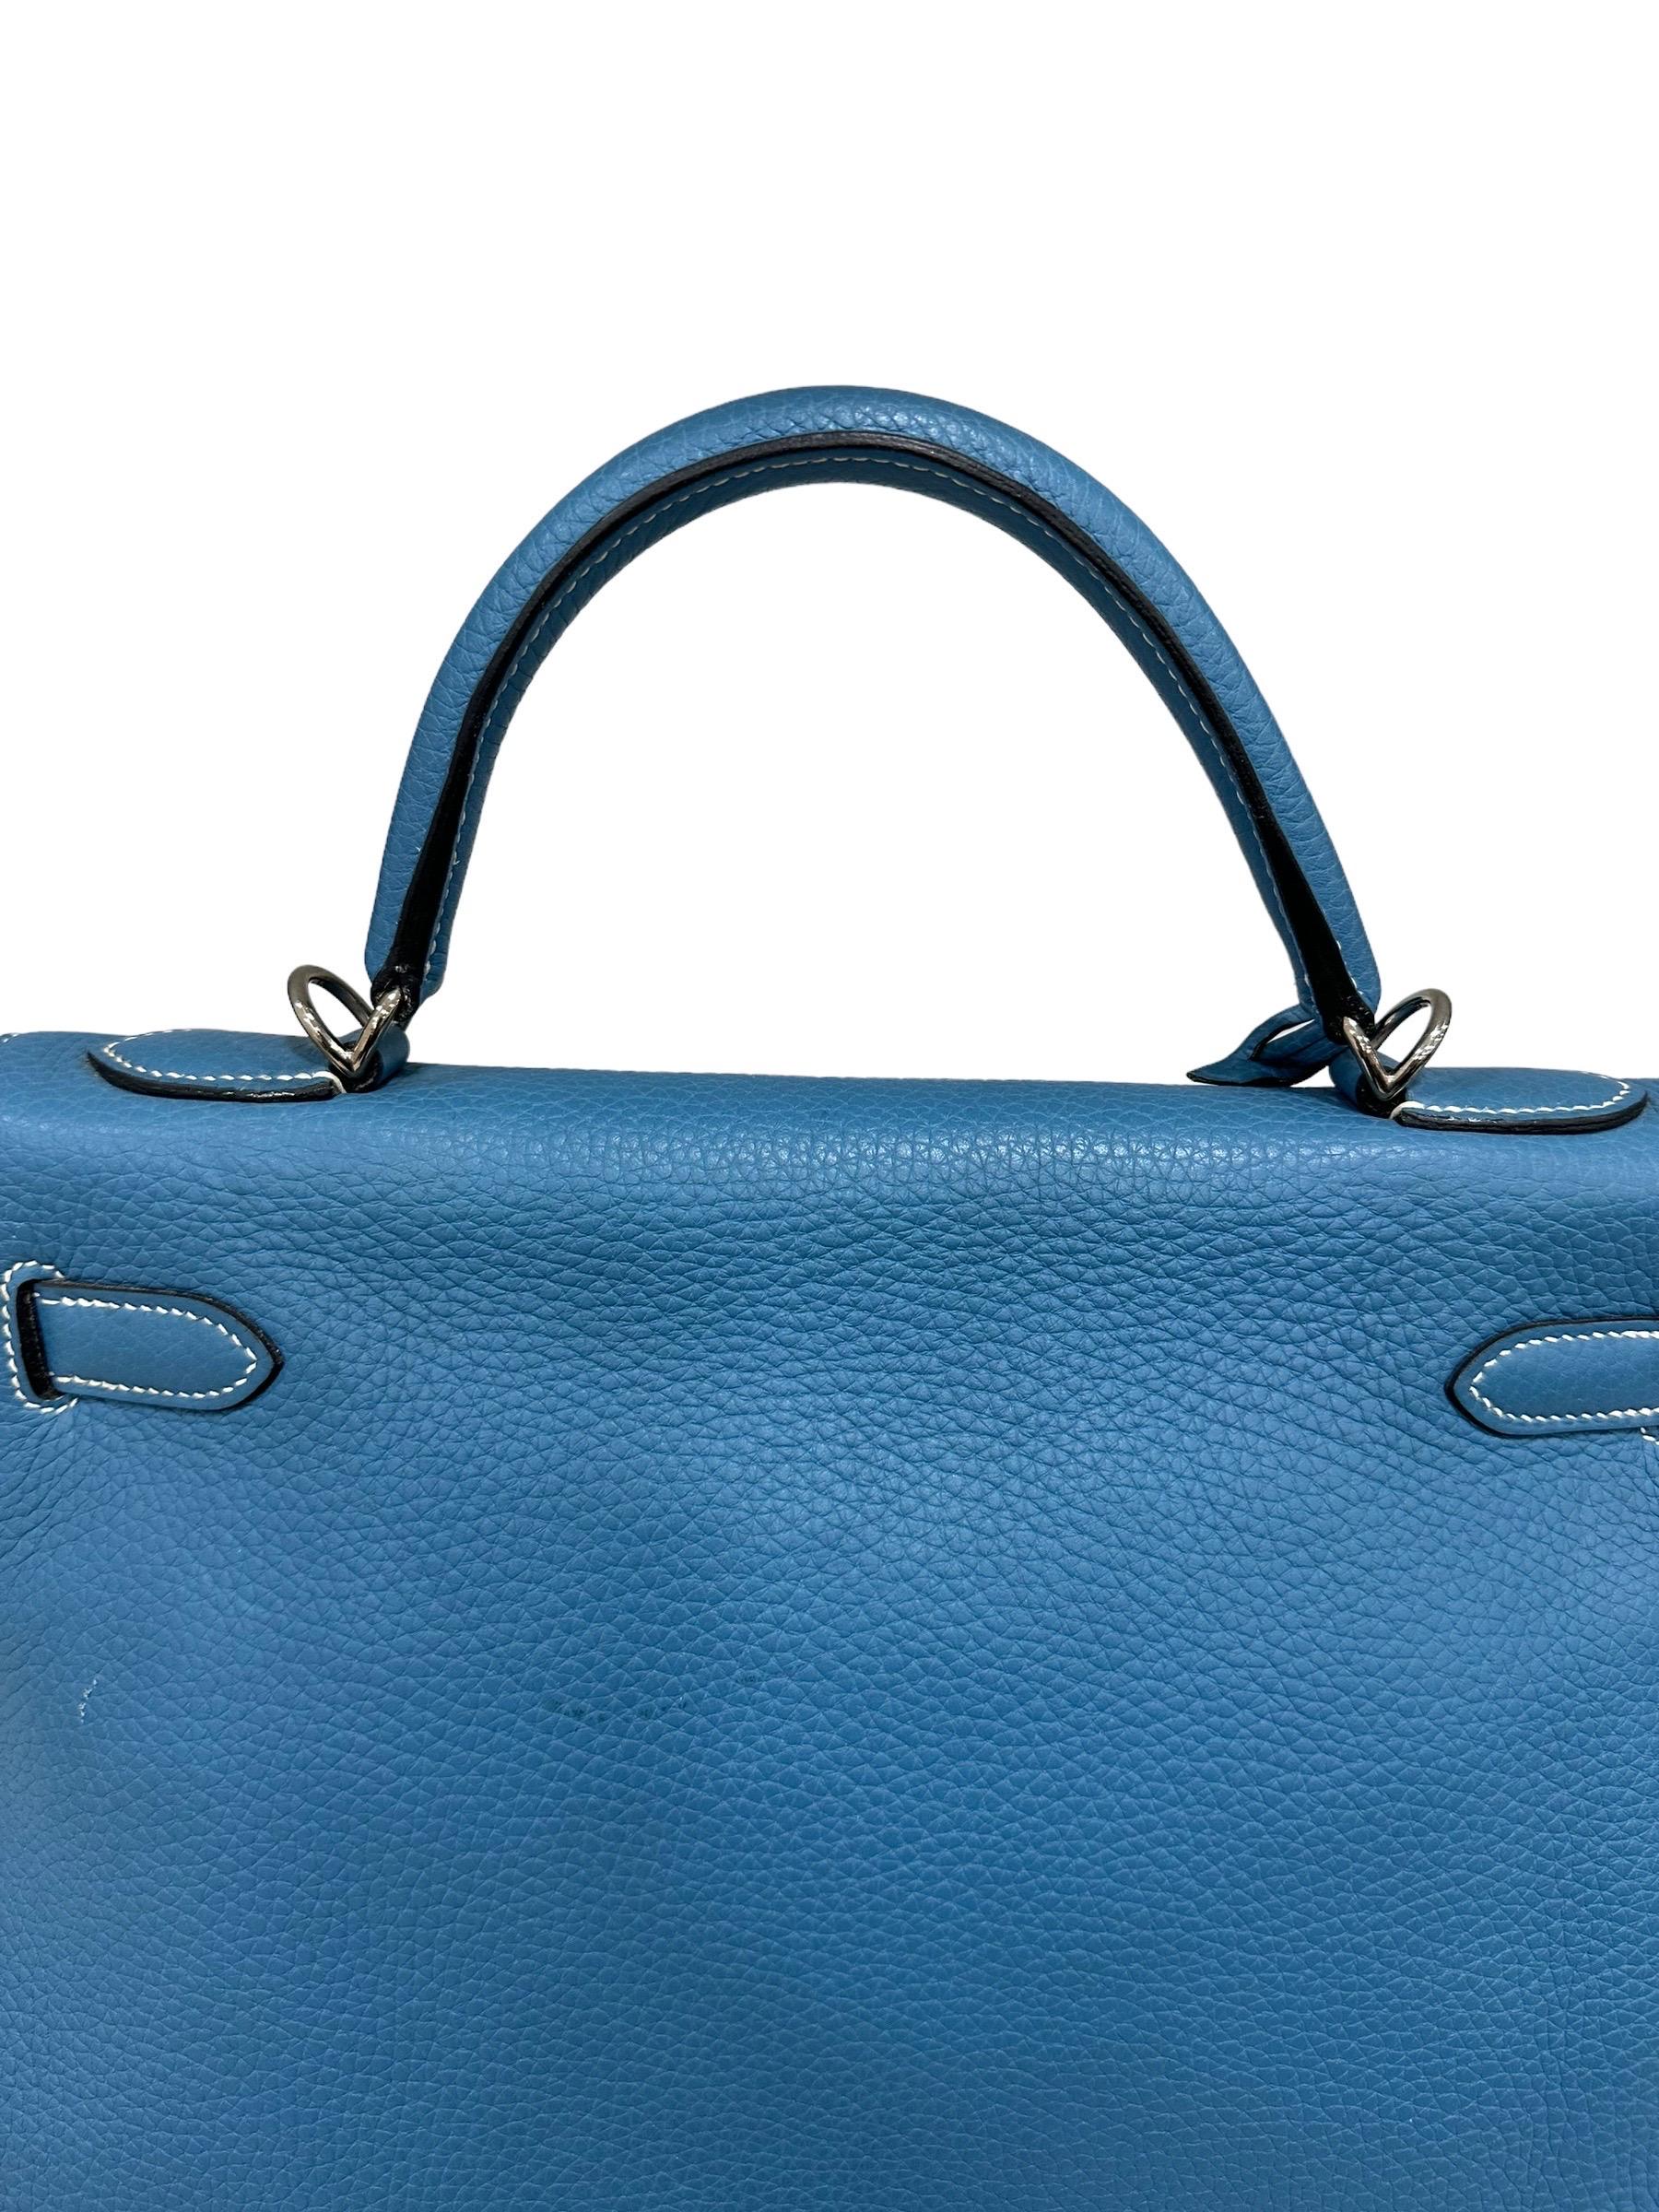 Hermès Kelly Bag 32 Clemence Leather Blue Izmir Top Handle Bag In Excellent Condition For Sale In Torre Del Greco, IT